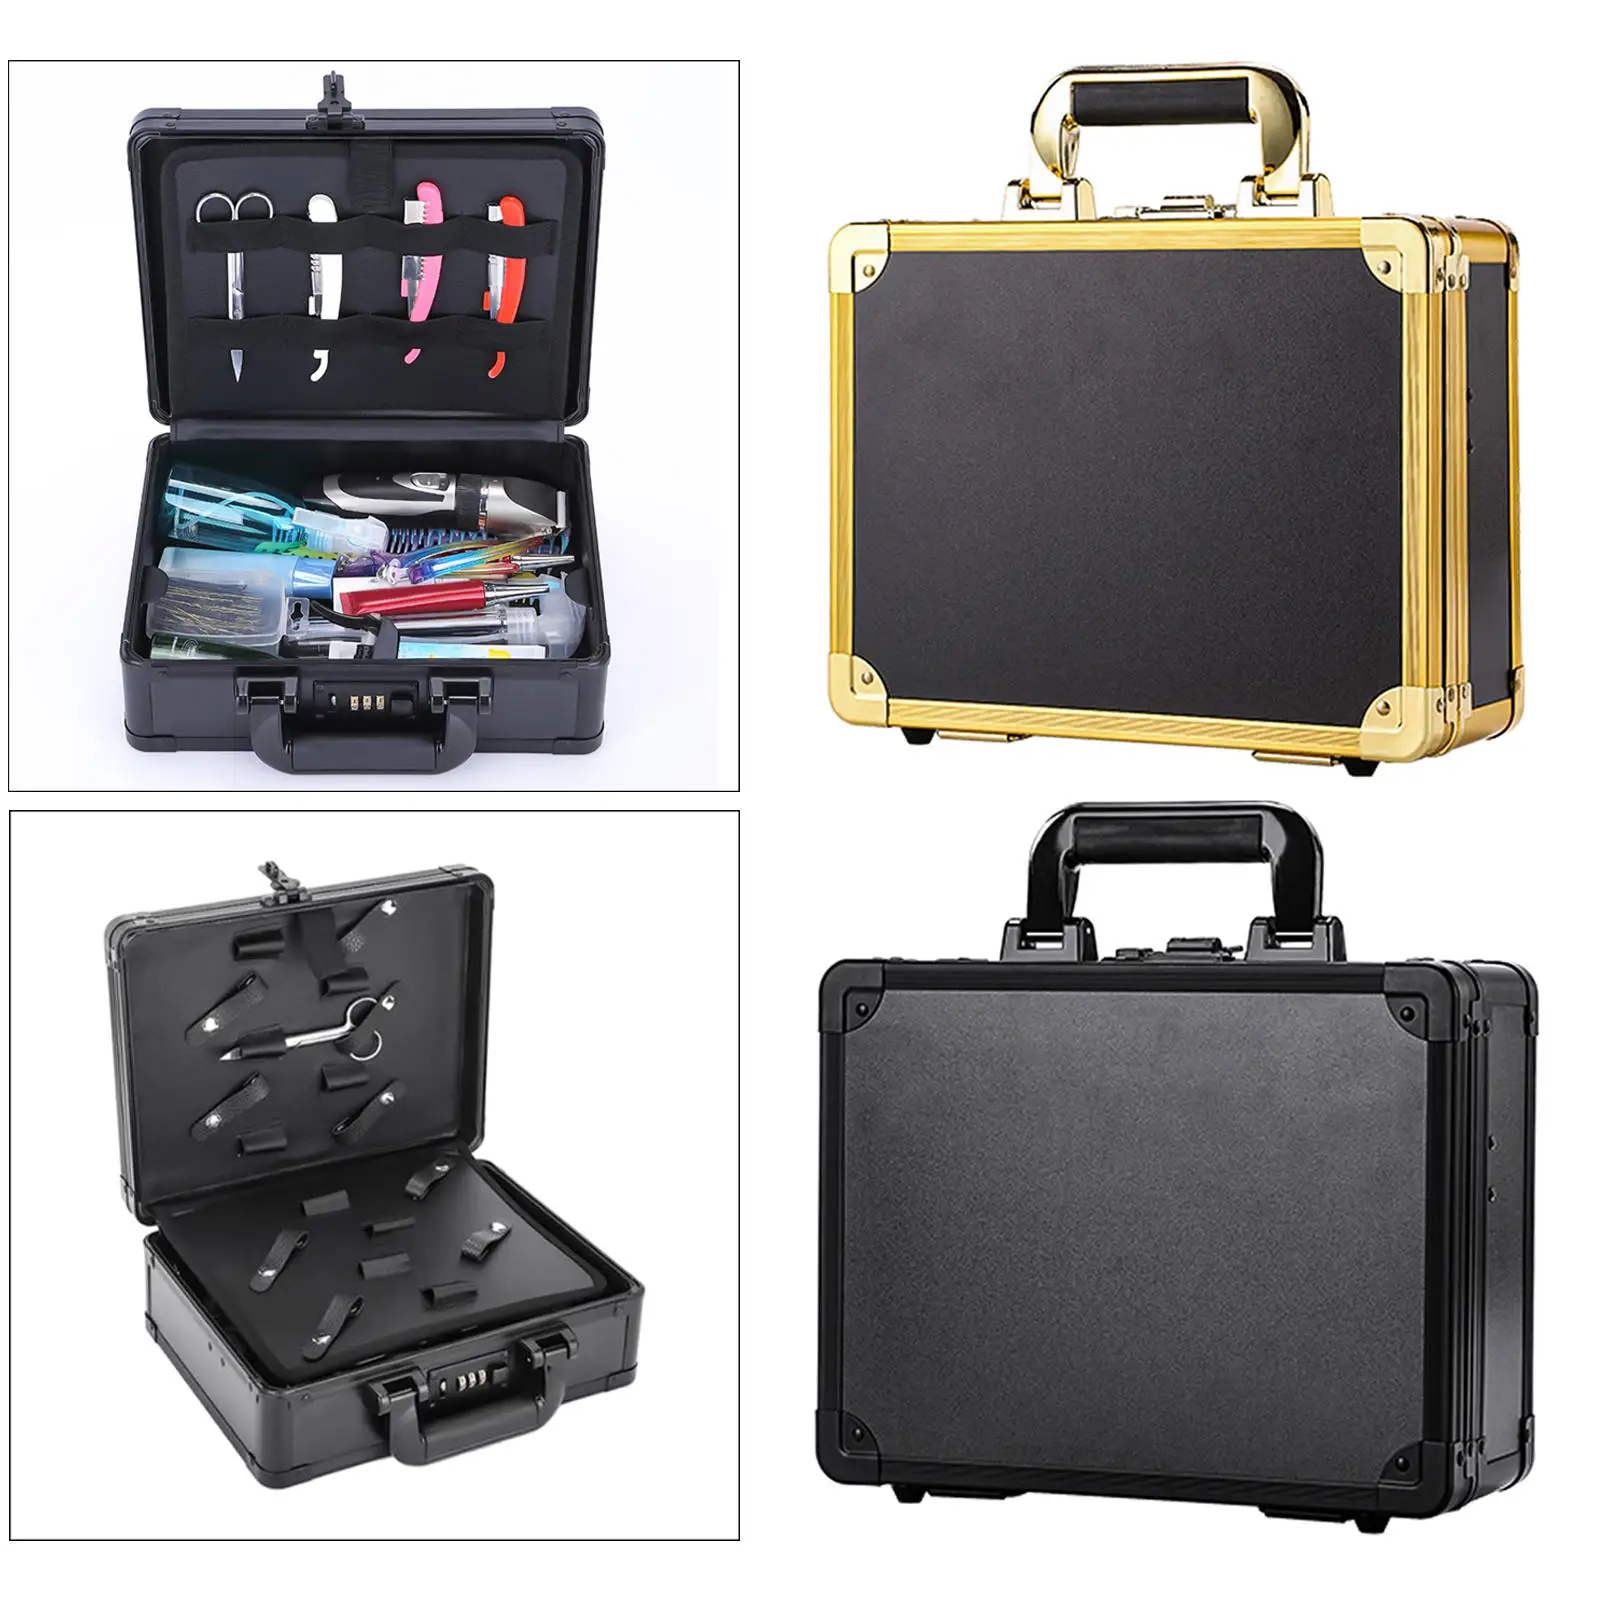 Barber Case Portable Kit Aluminum Secure Tool Professional Hair Stylist Box Organizer for Trimmers Travel Clippers Beauty Makeup